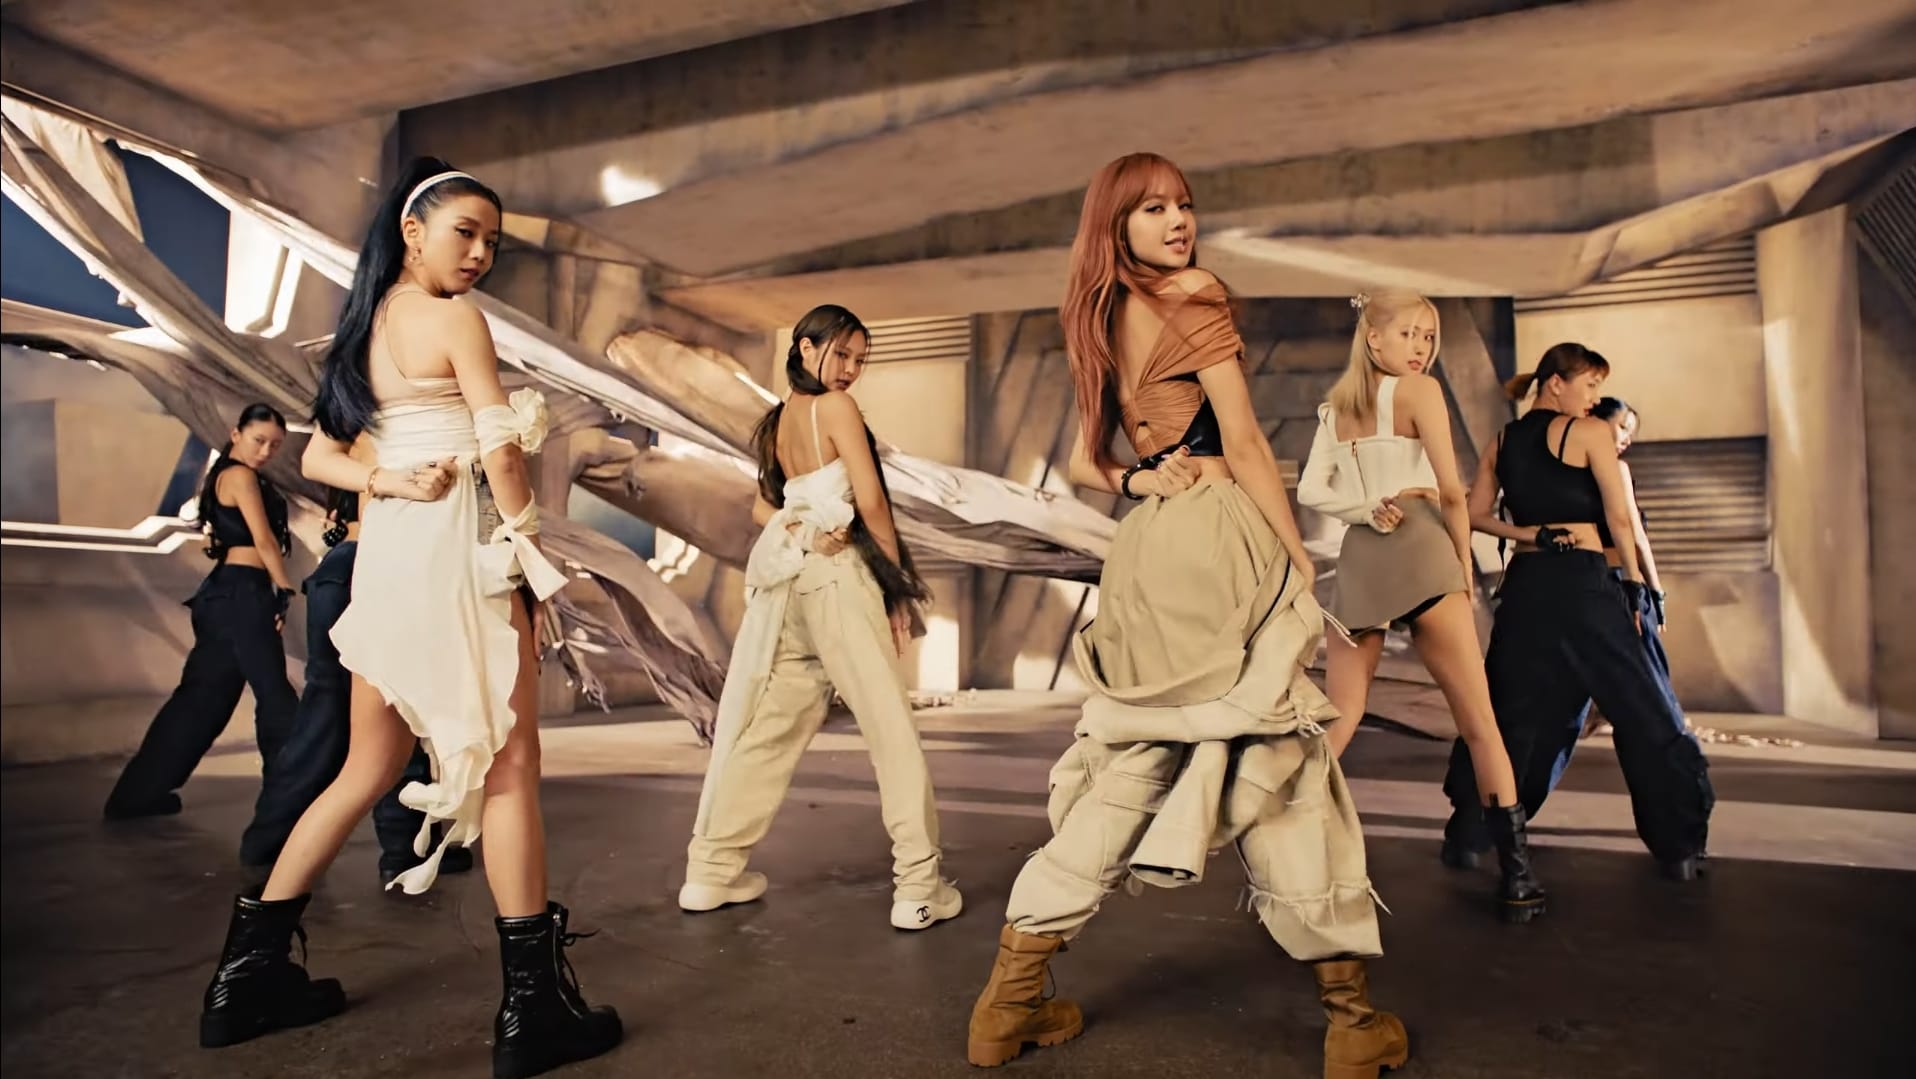 Take a look at 12 mvs that bring the most impressive fashion party in 2022